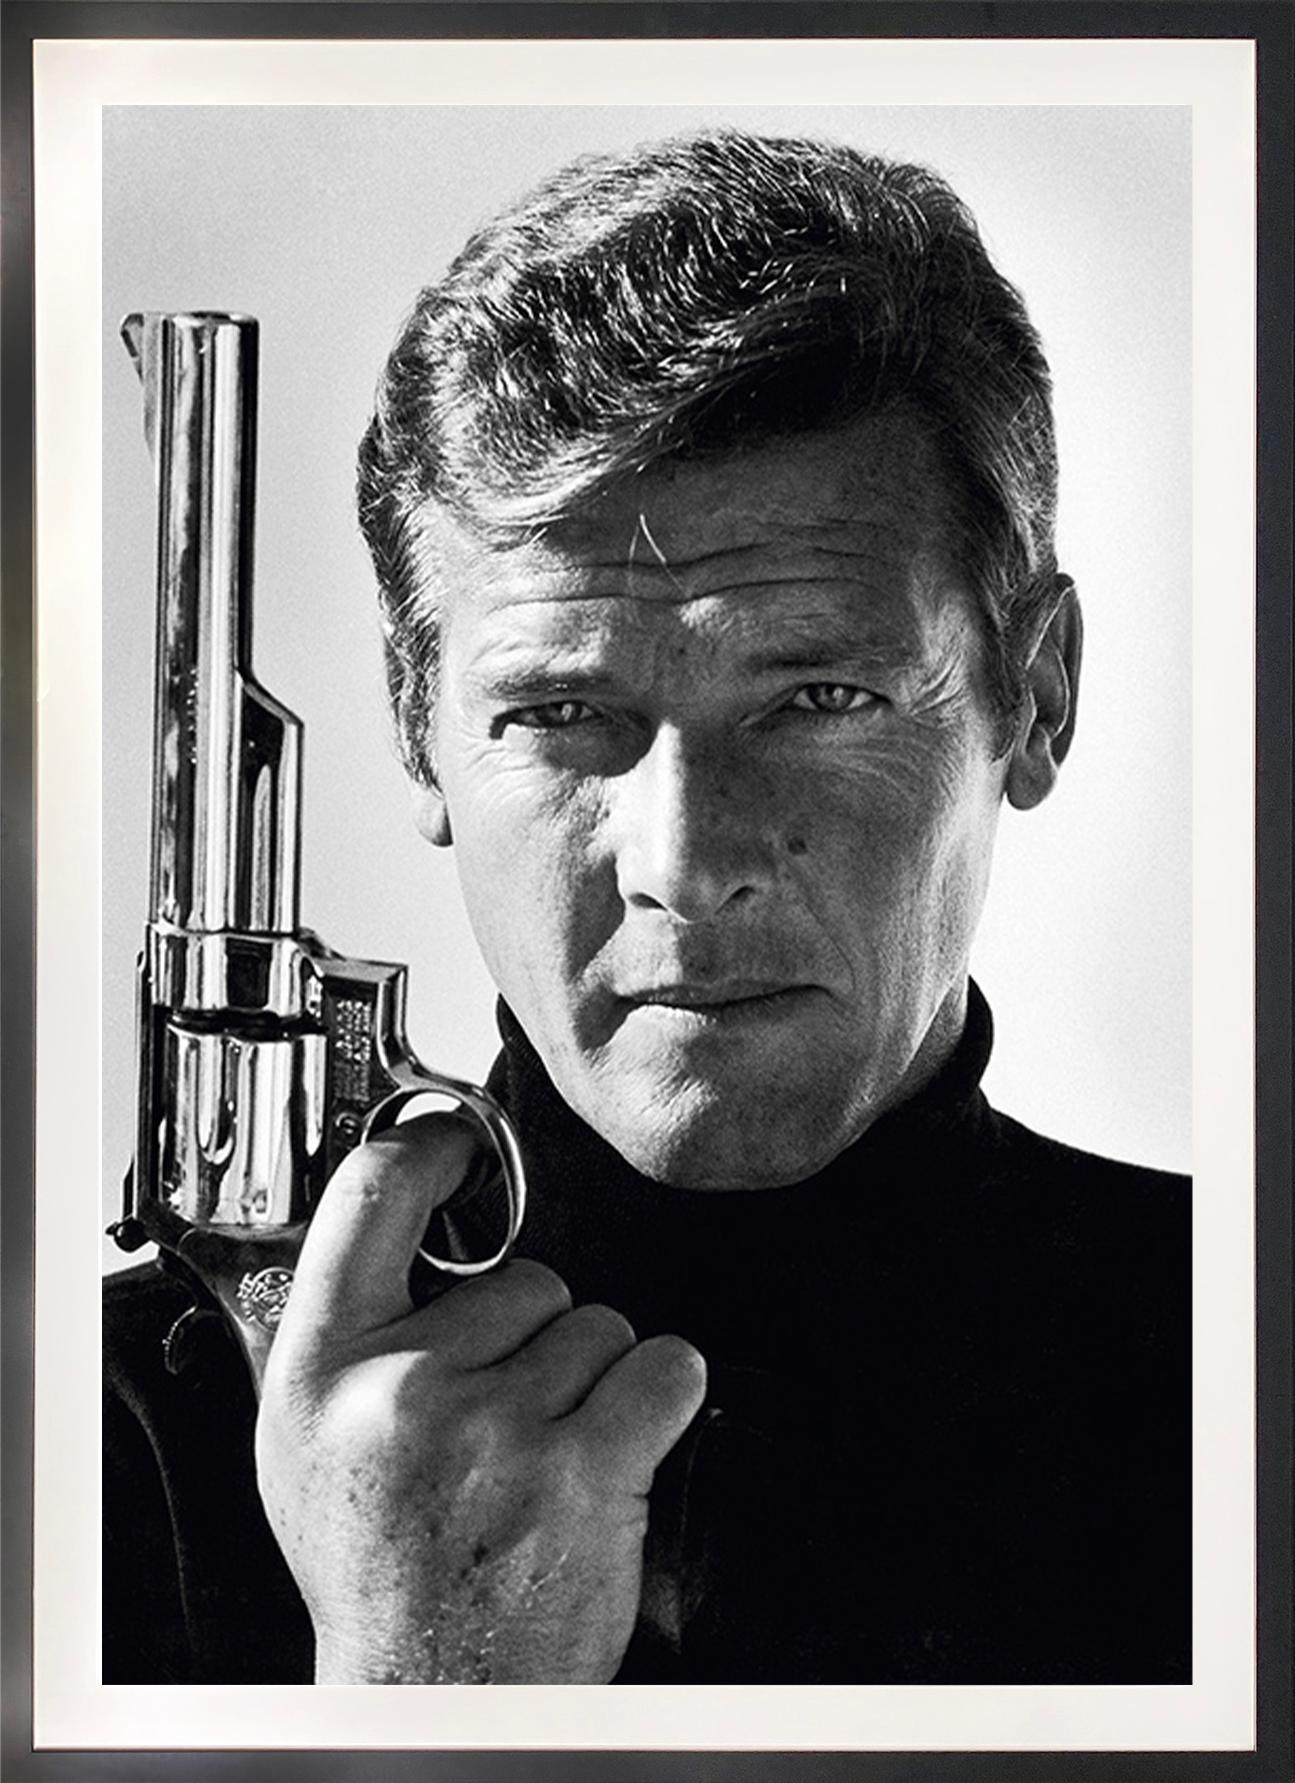 Roger Moore as James Bond - Photograph by Terry O'Neill